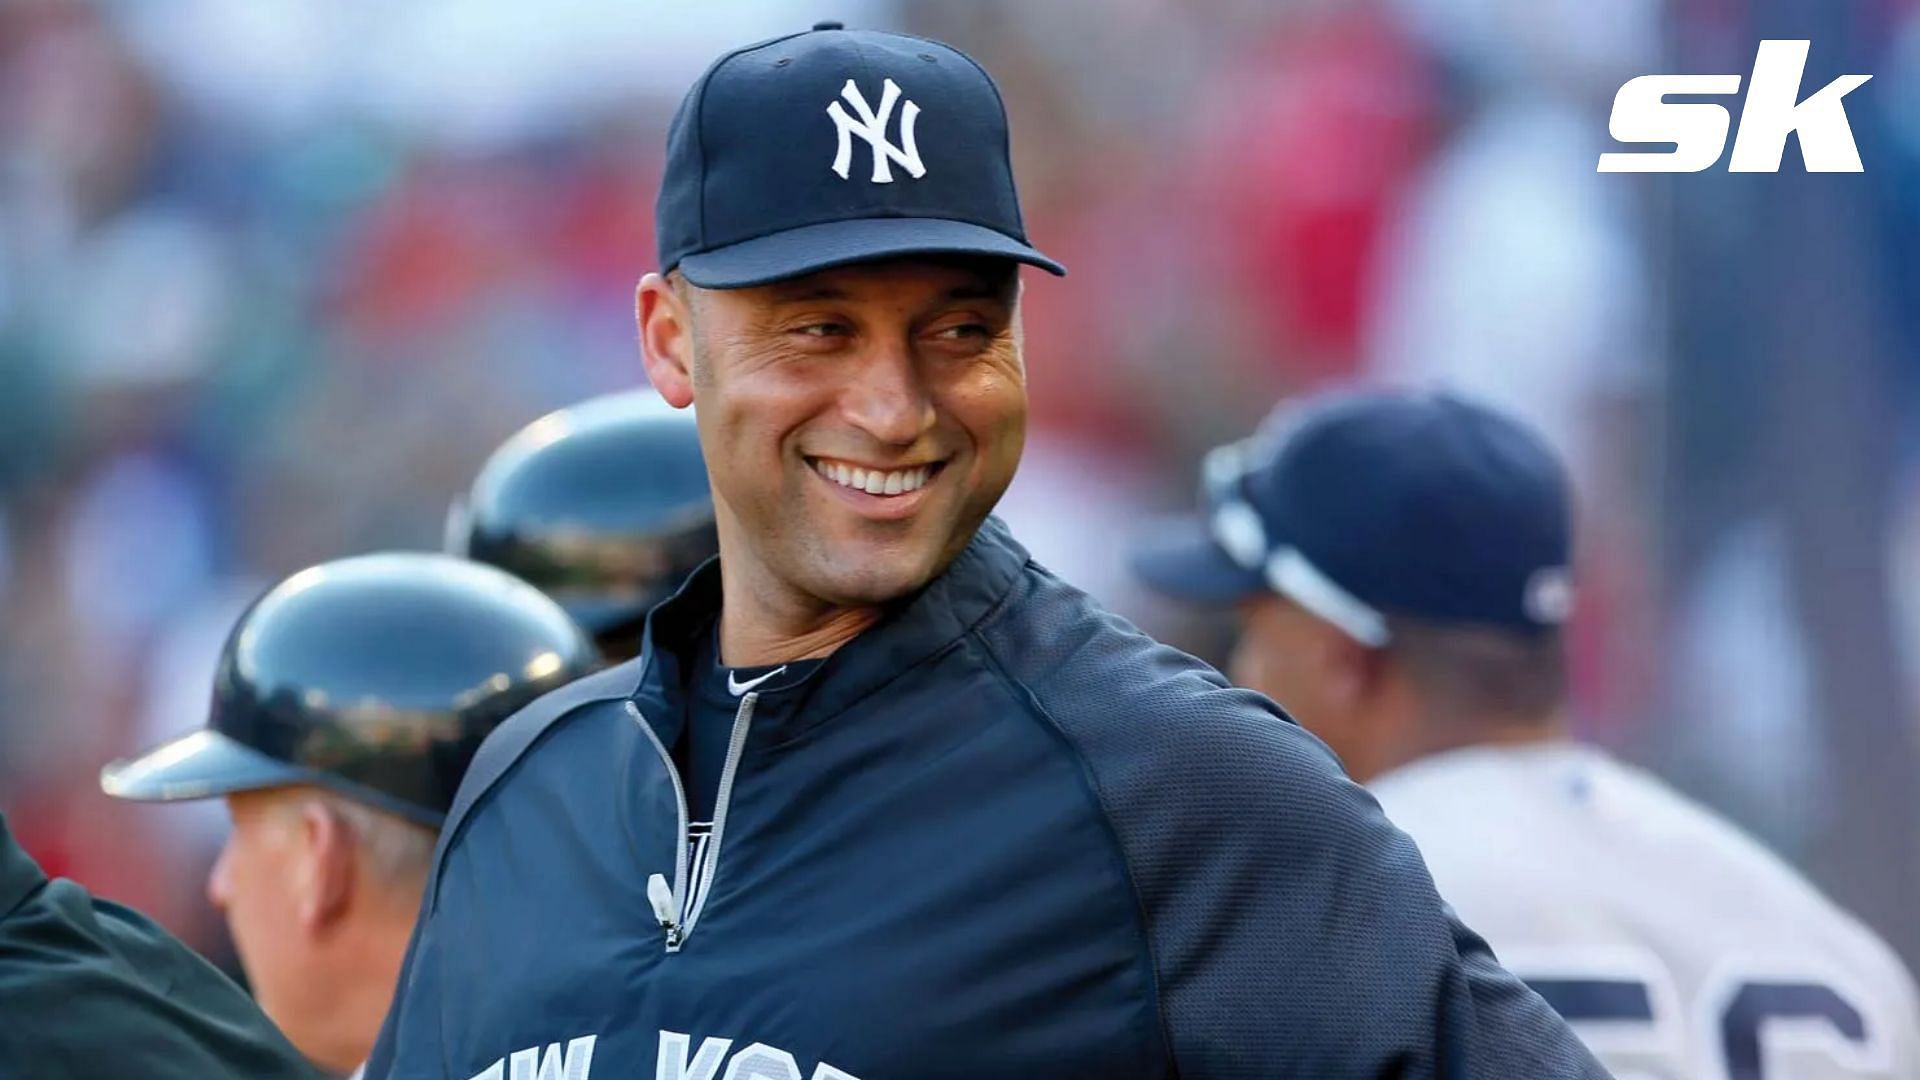 When New York Yankees top prospect Anthony Volpe celebrated Derek Jeter as a once-in-a-lifetime player